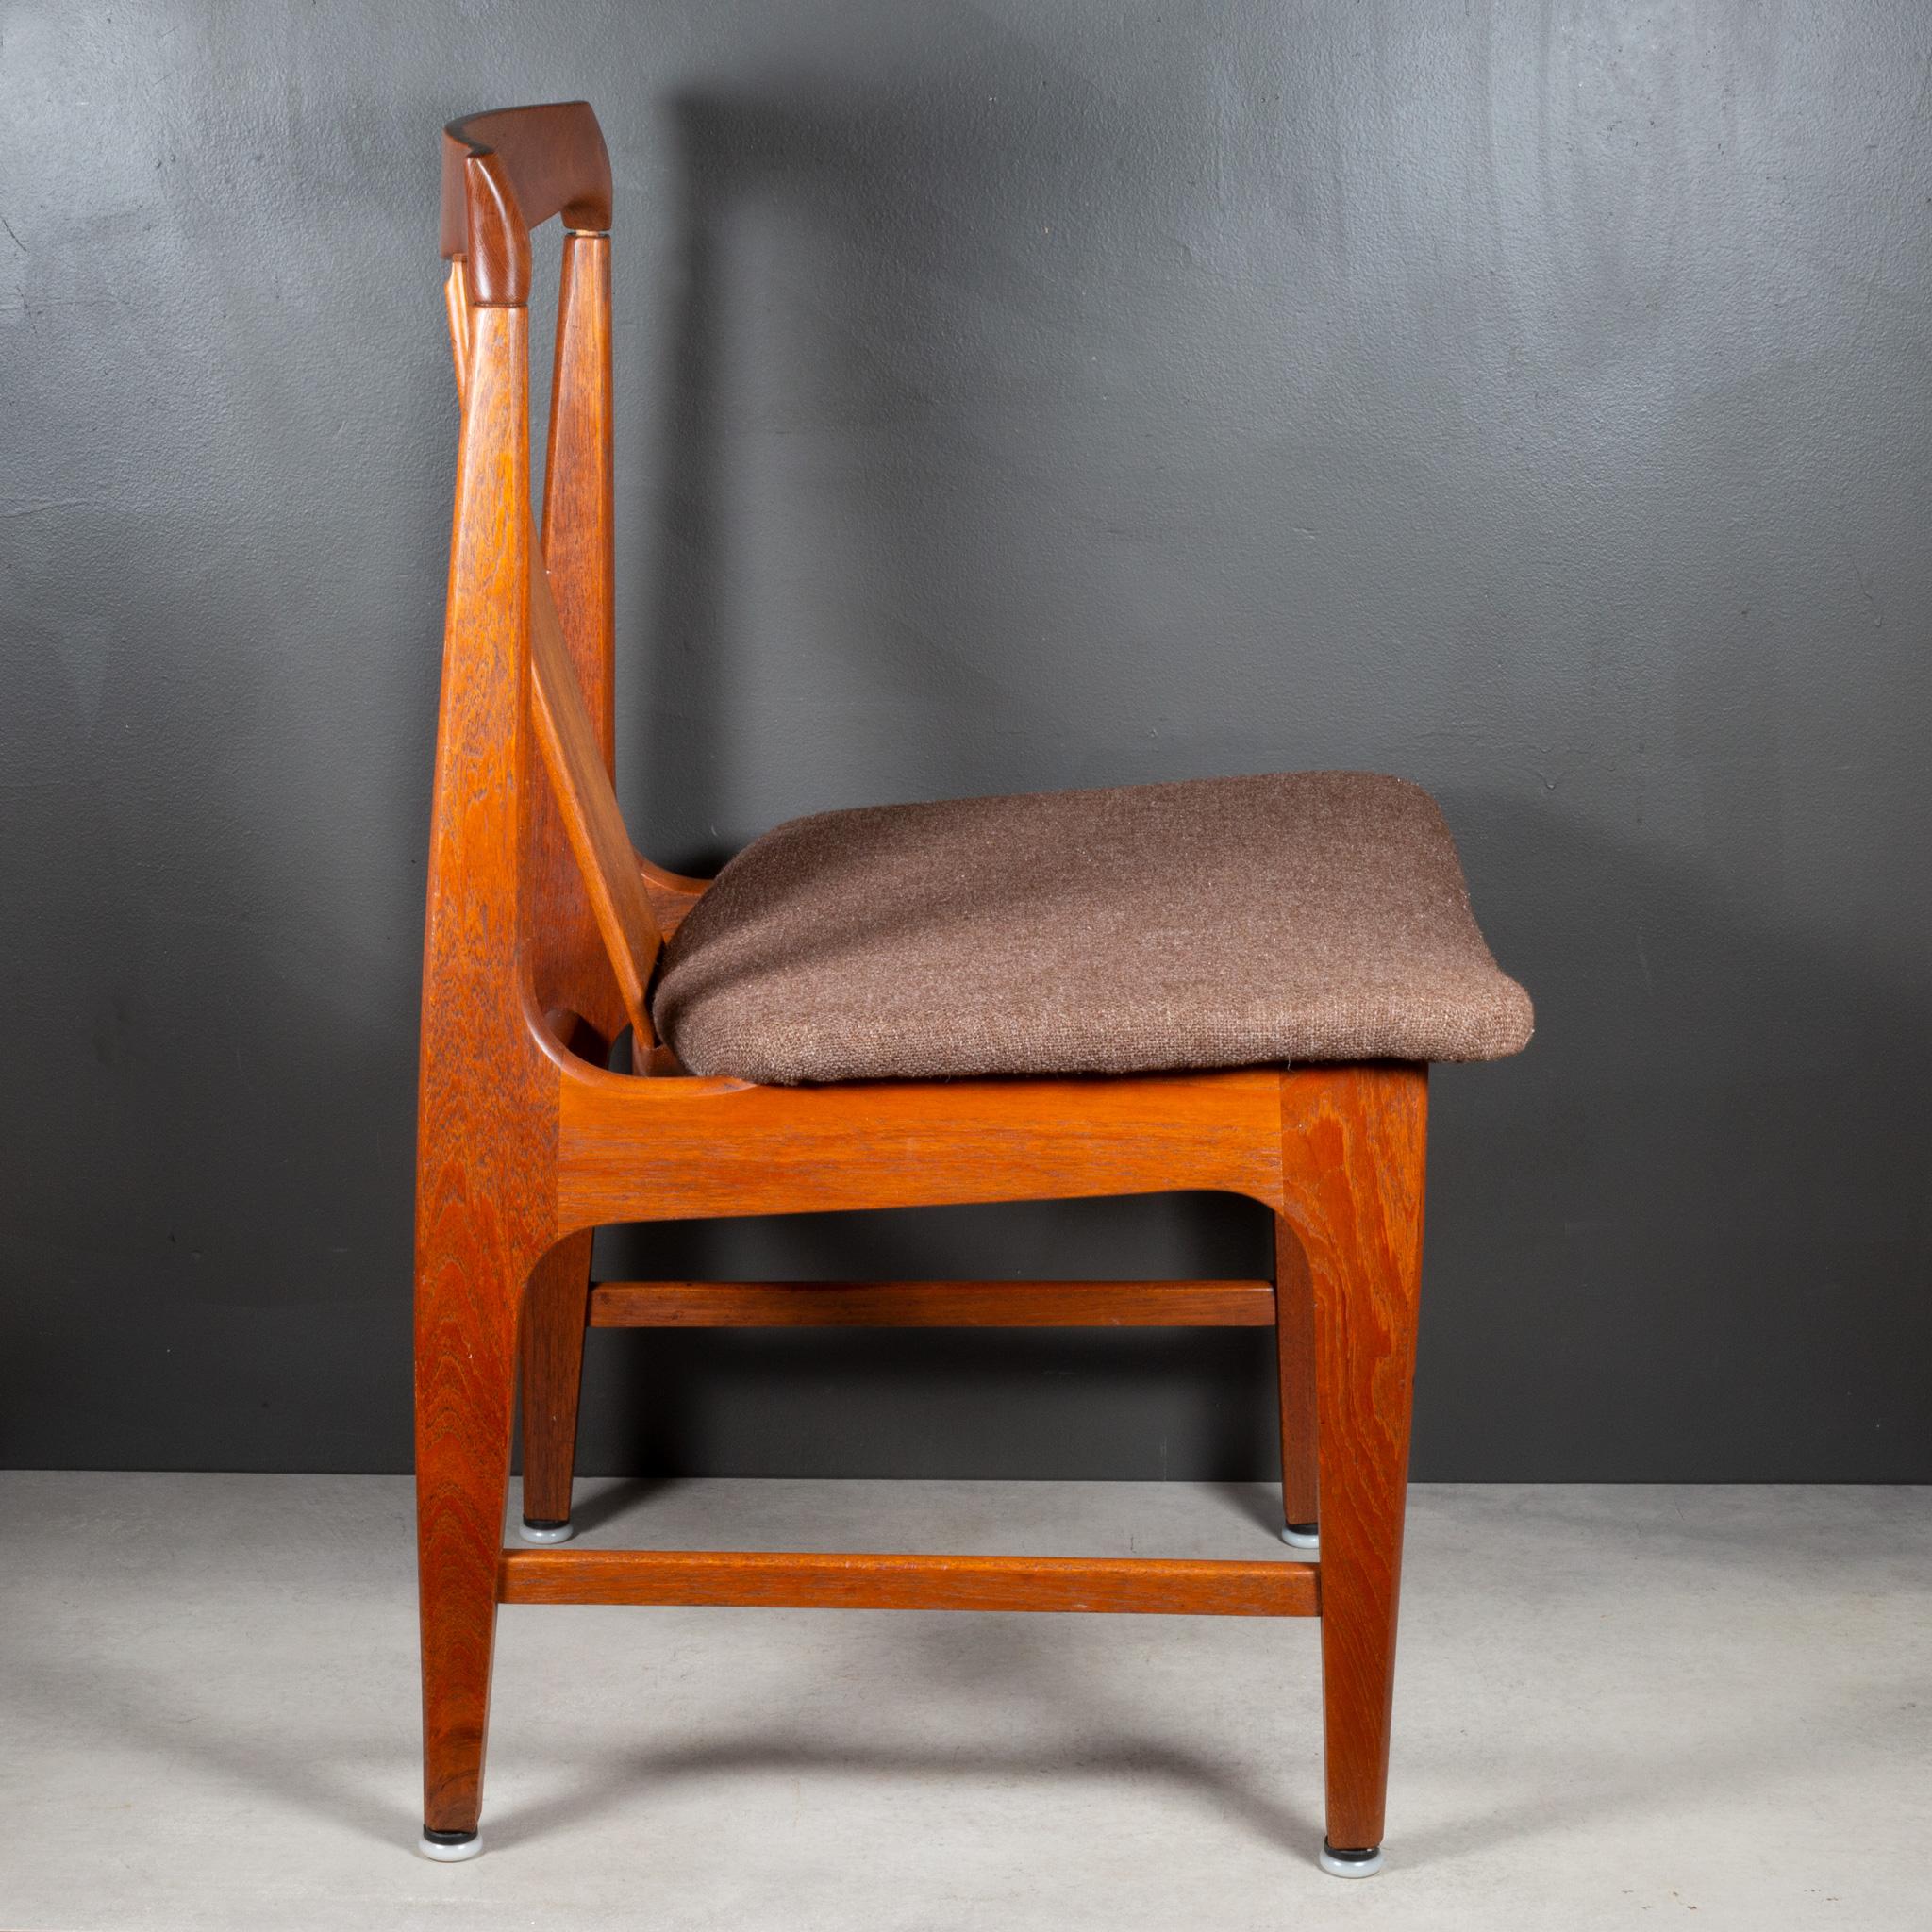 Midcentury Japanese Sculpted Teak Dining Chairs C.1960 In Good Condition For Sale In San Francisco, CA